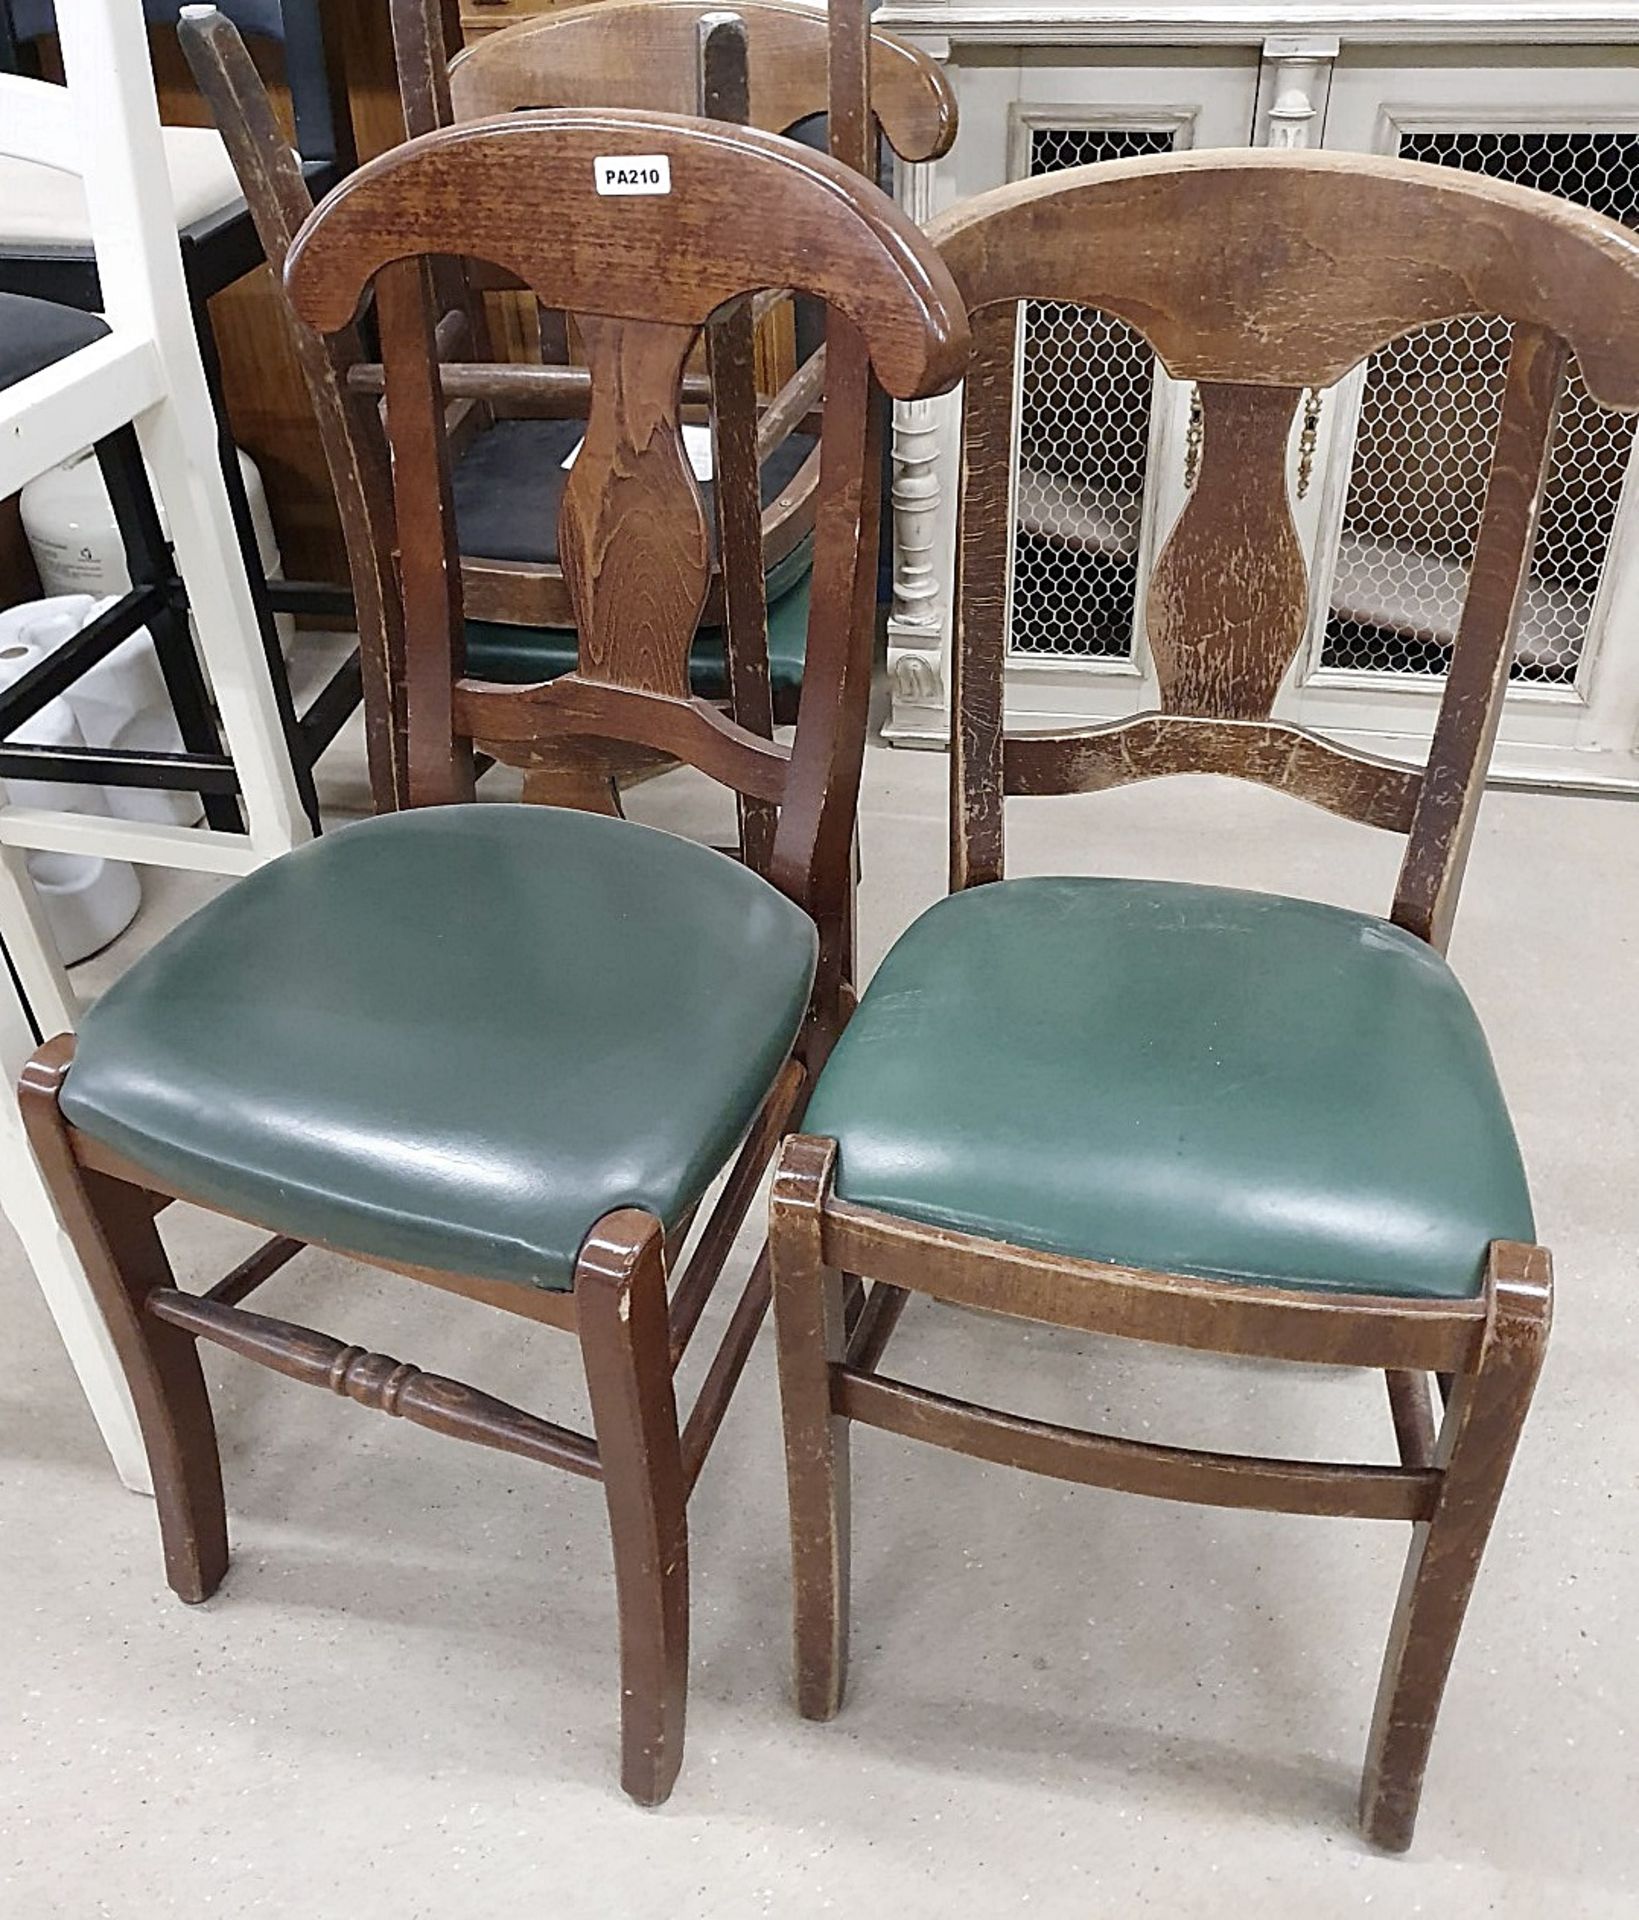 4 x Waring Dining Chairs With Green Leather Seat Pads - Ref PA210 - CL463 - Location: Altrincham WA1